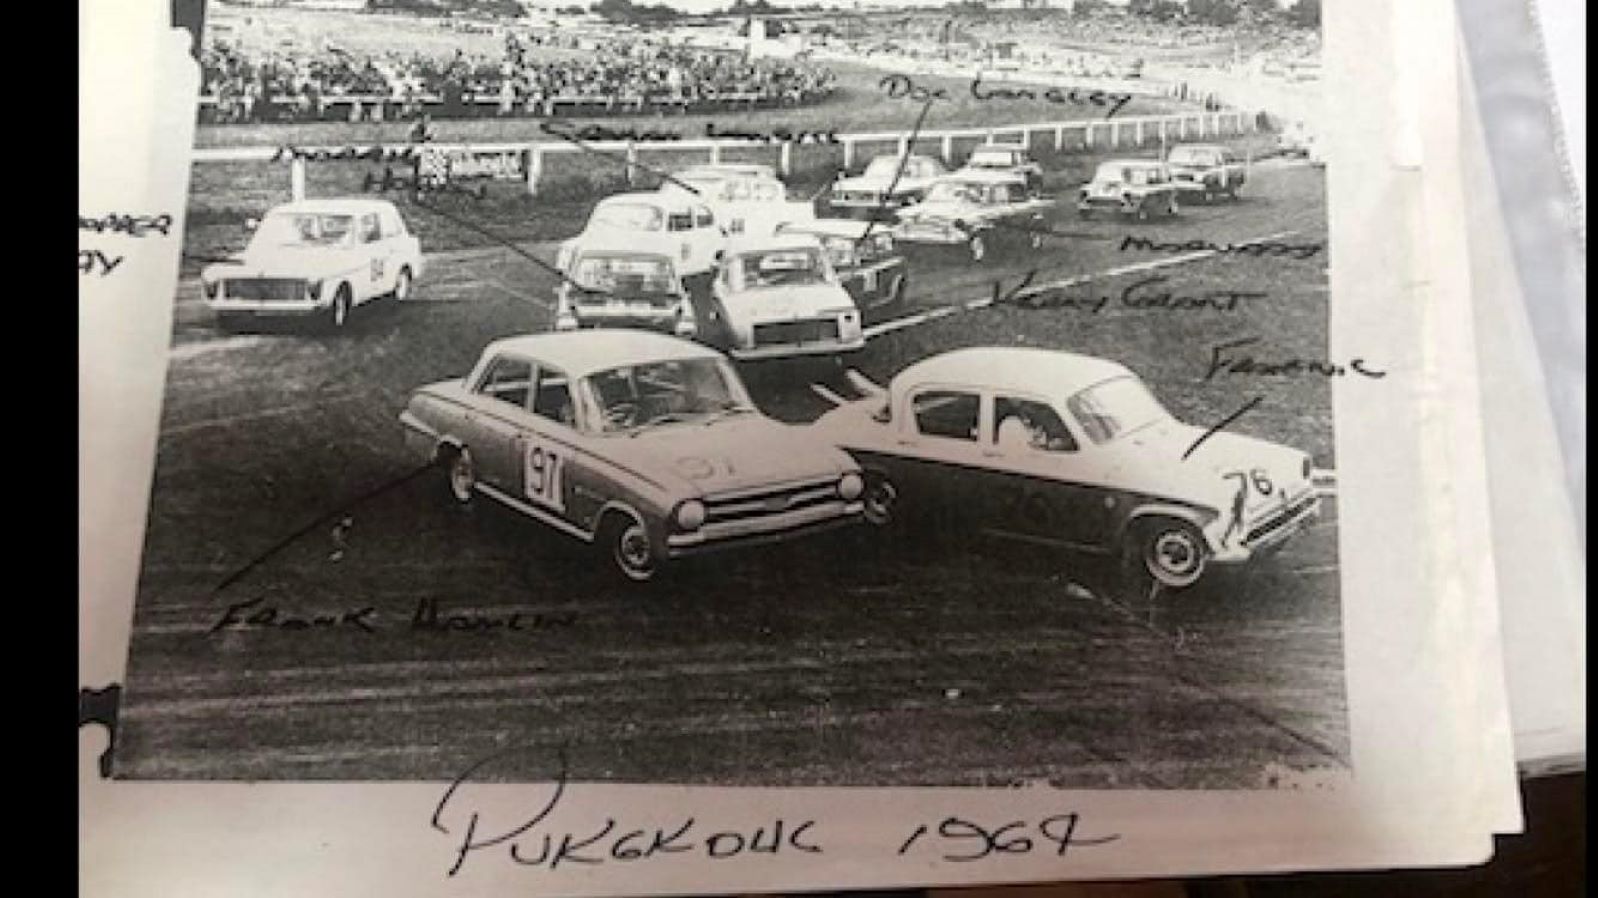 Name:  Pukekohe 1964 #022 1964 Saloon Car field at the Elbow - GP meeting Q 172 kb arch HVRA Bruce Dyer.jpg
Views: 306
Size:  172.4 KB